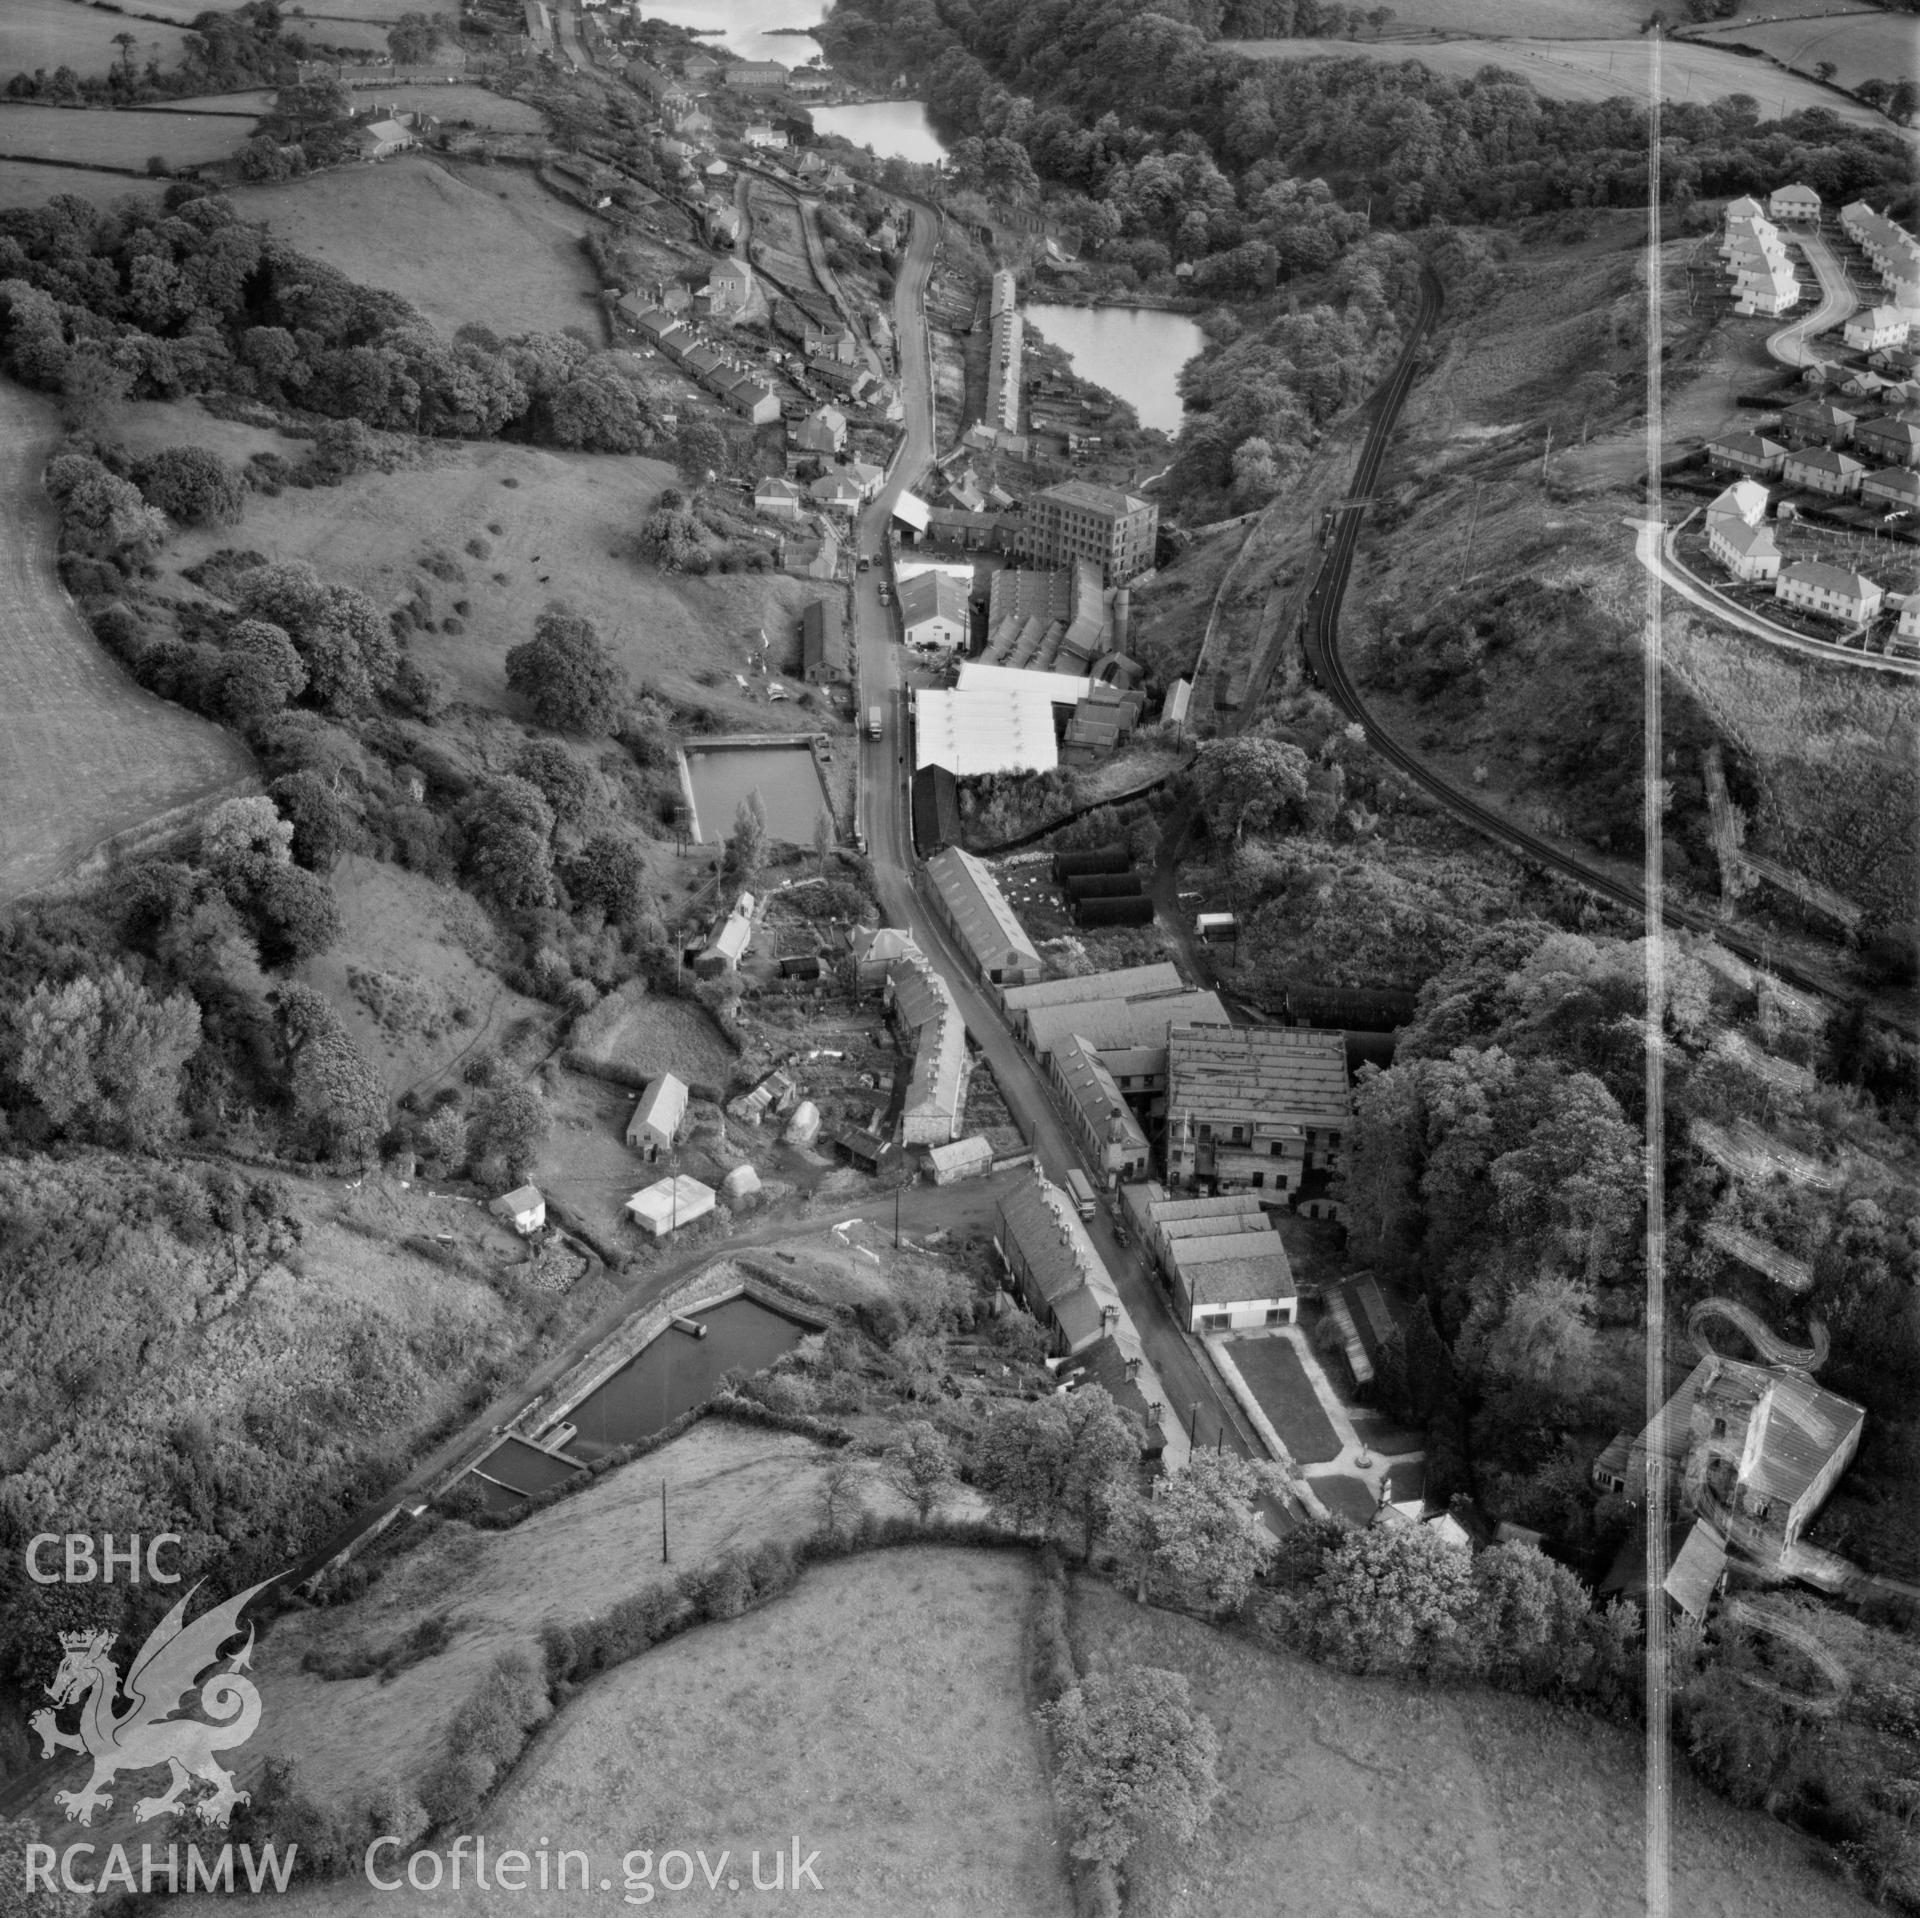 View of Holywell, commissioned by Holywell Textile Mills Ltd., showing industrial buildings and housing estate